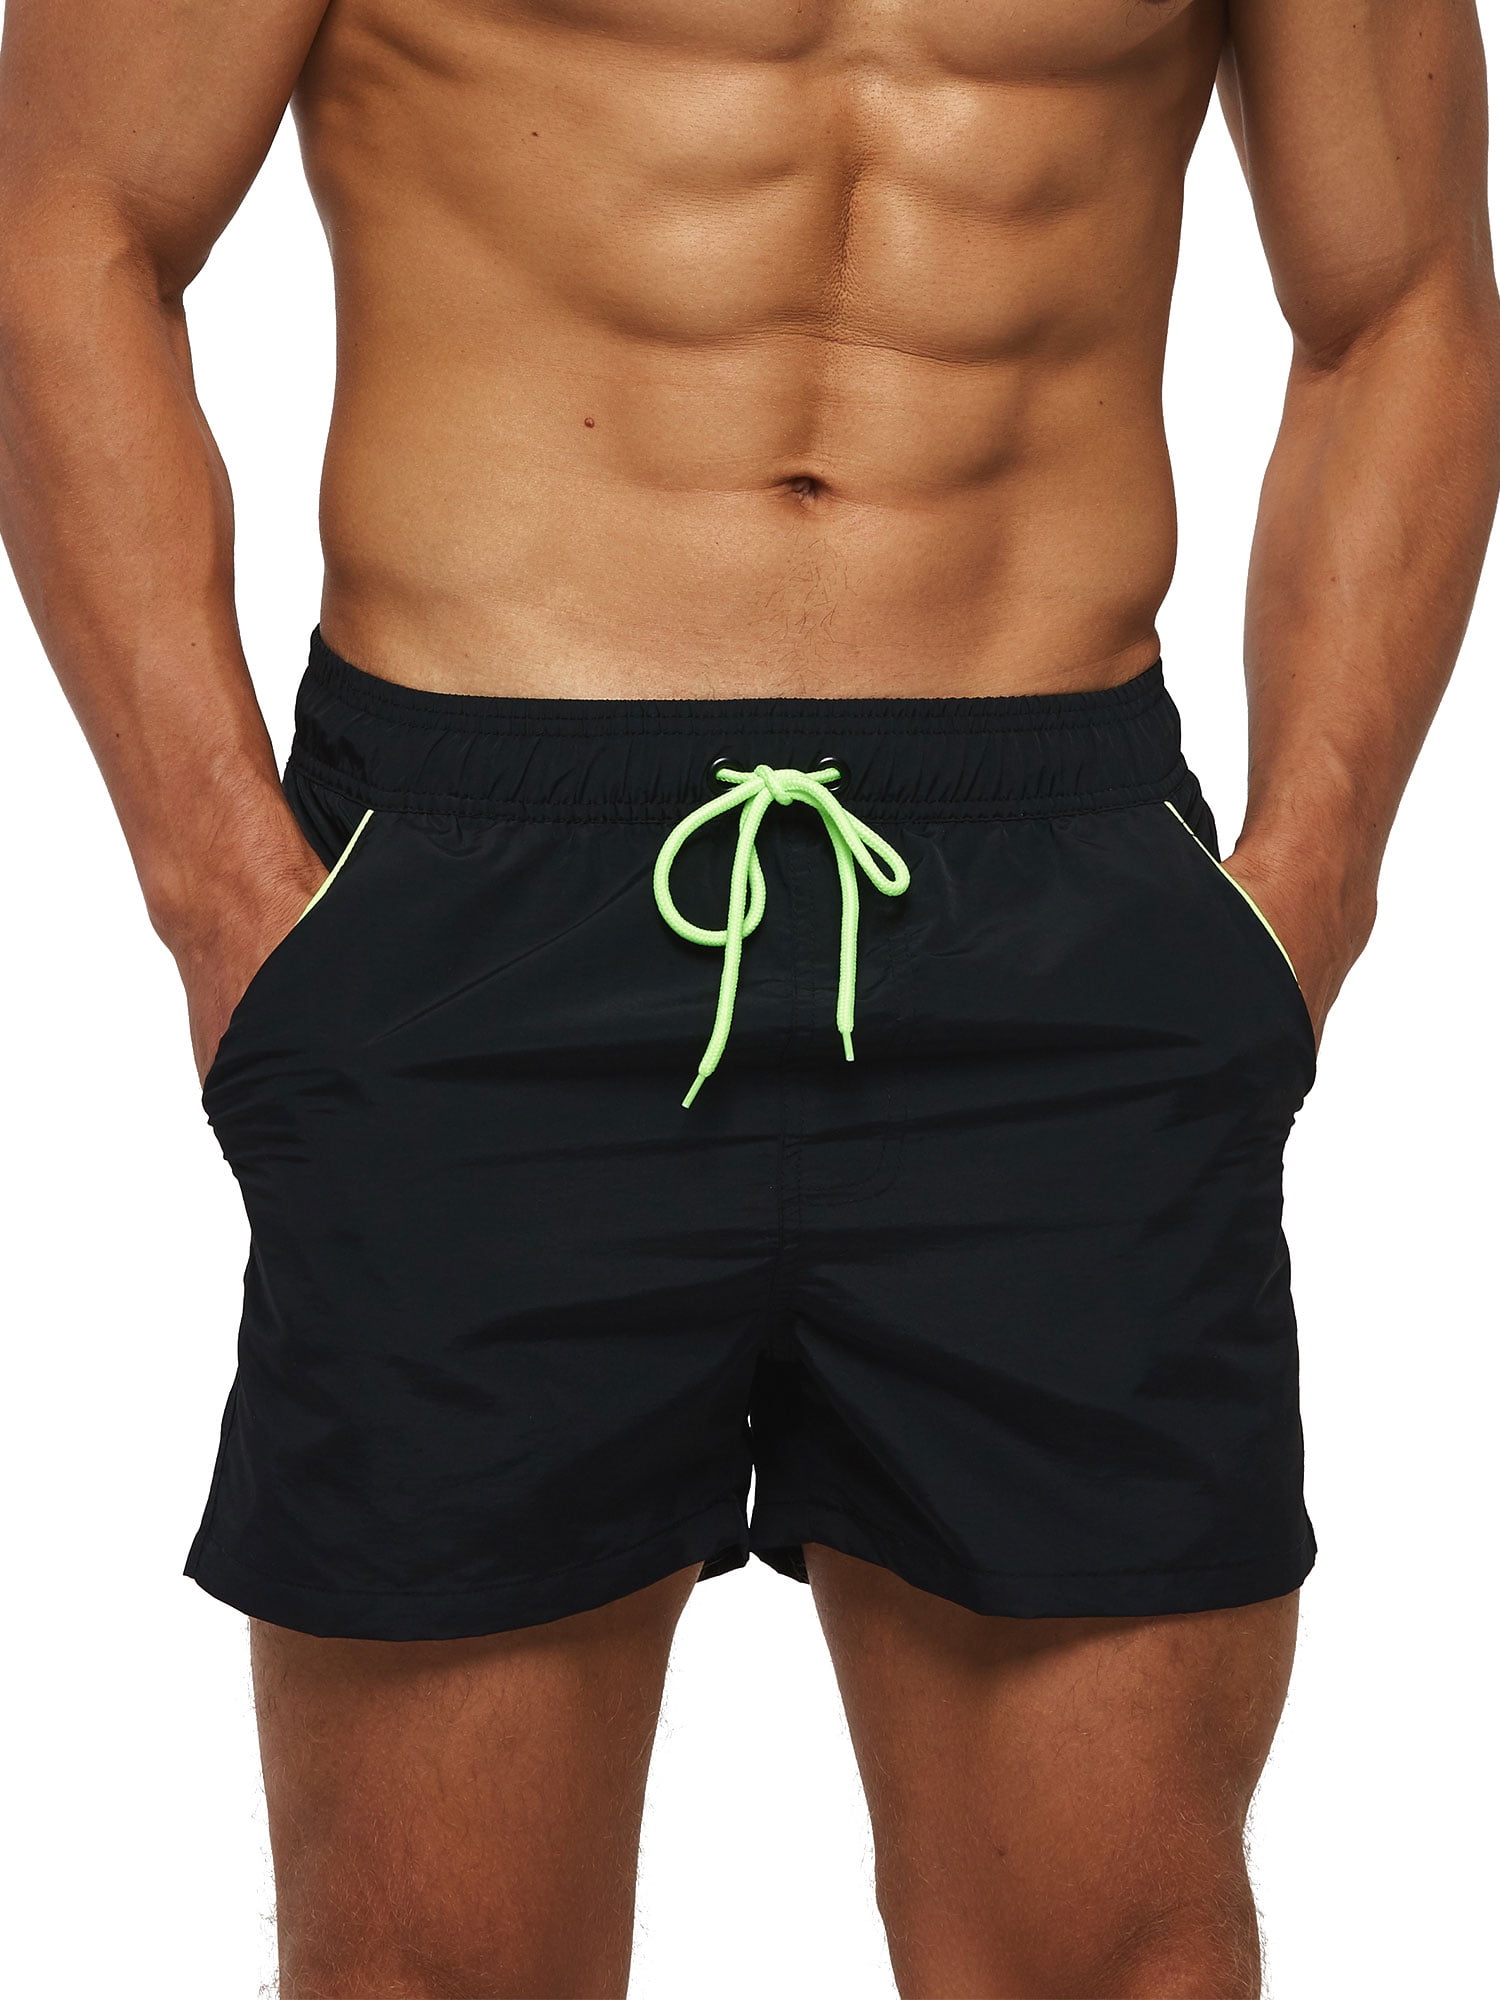 A Variety of Elements Mens Beach Board Shorts Quick Dry Summer Casual Swimming Soft Fabric with Pocket